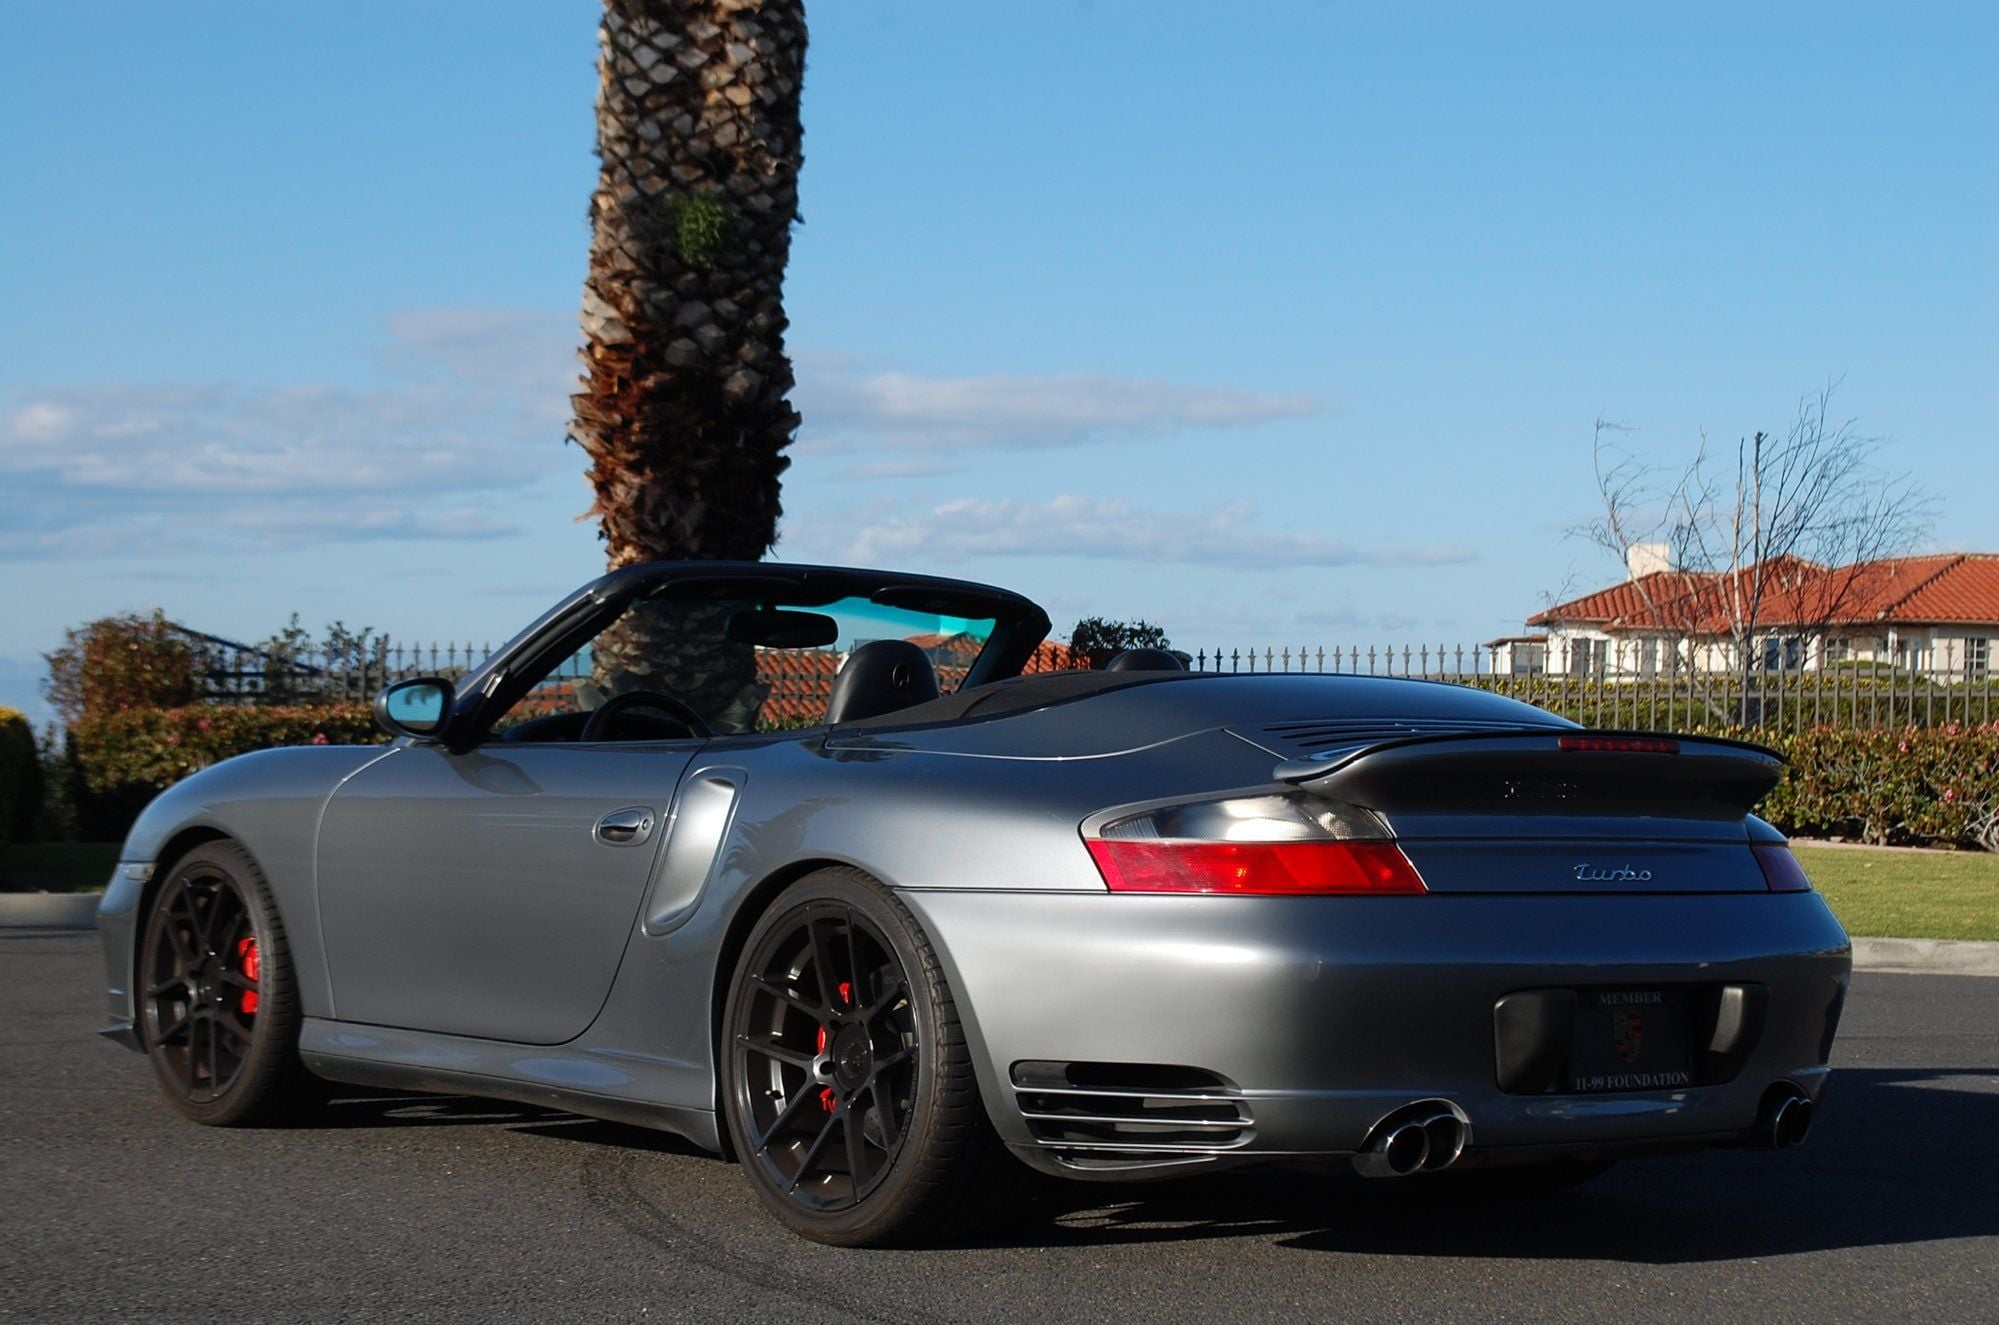 2004 Porsche 911 - 2004 6 Speed Turbo Cab, 59k miles, Ohlins coil-overs, Cobb tune, $45,000. - Used - VIN WWWWWWWWWWWWWWWWW - 59,600 Miles - 6 cyl - AWD - Manual - Convertible - Gray - Beverly Hills, CA 90210, United States